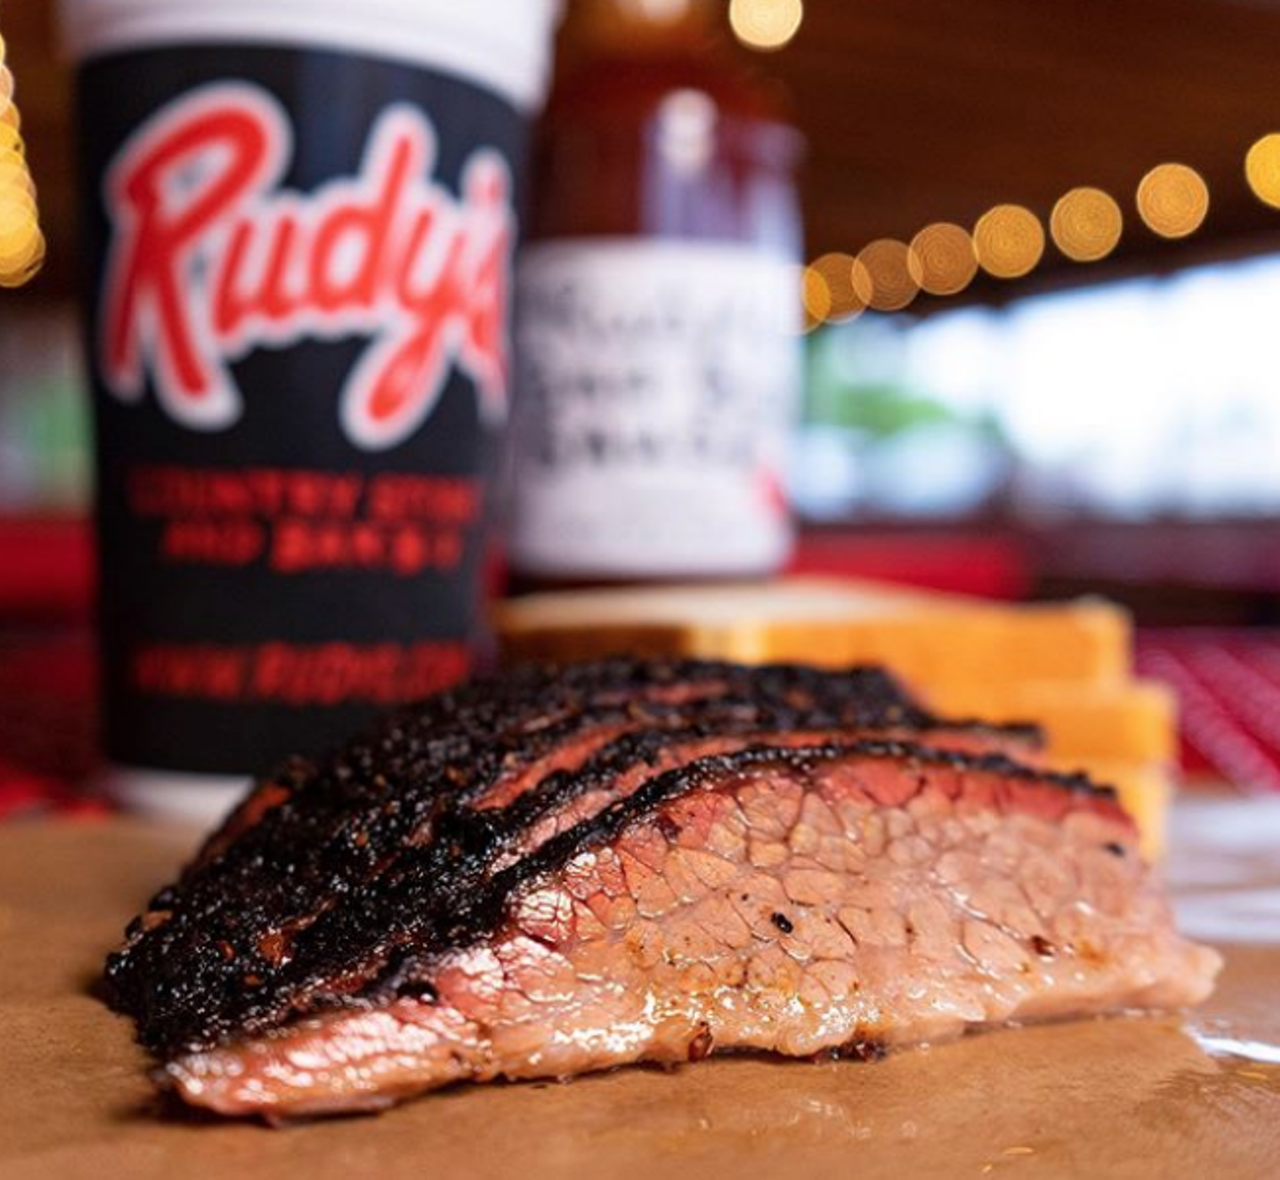 Rudy's Country Store and Bar-B-Q
Multiple locations, rudysbbq.com
While Texas has no shortage of one-of-a-kind barbecue outposts, Rudy’s remains one a favorite for many locals. The secret for this -based chain is all in the “sause.” Slather your meats in this flavorful juice and you’ll be licking your fingers endlessly thanks to this Lakeway-based chain.
Photo via Instagram / rudysbbq